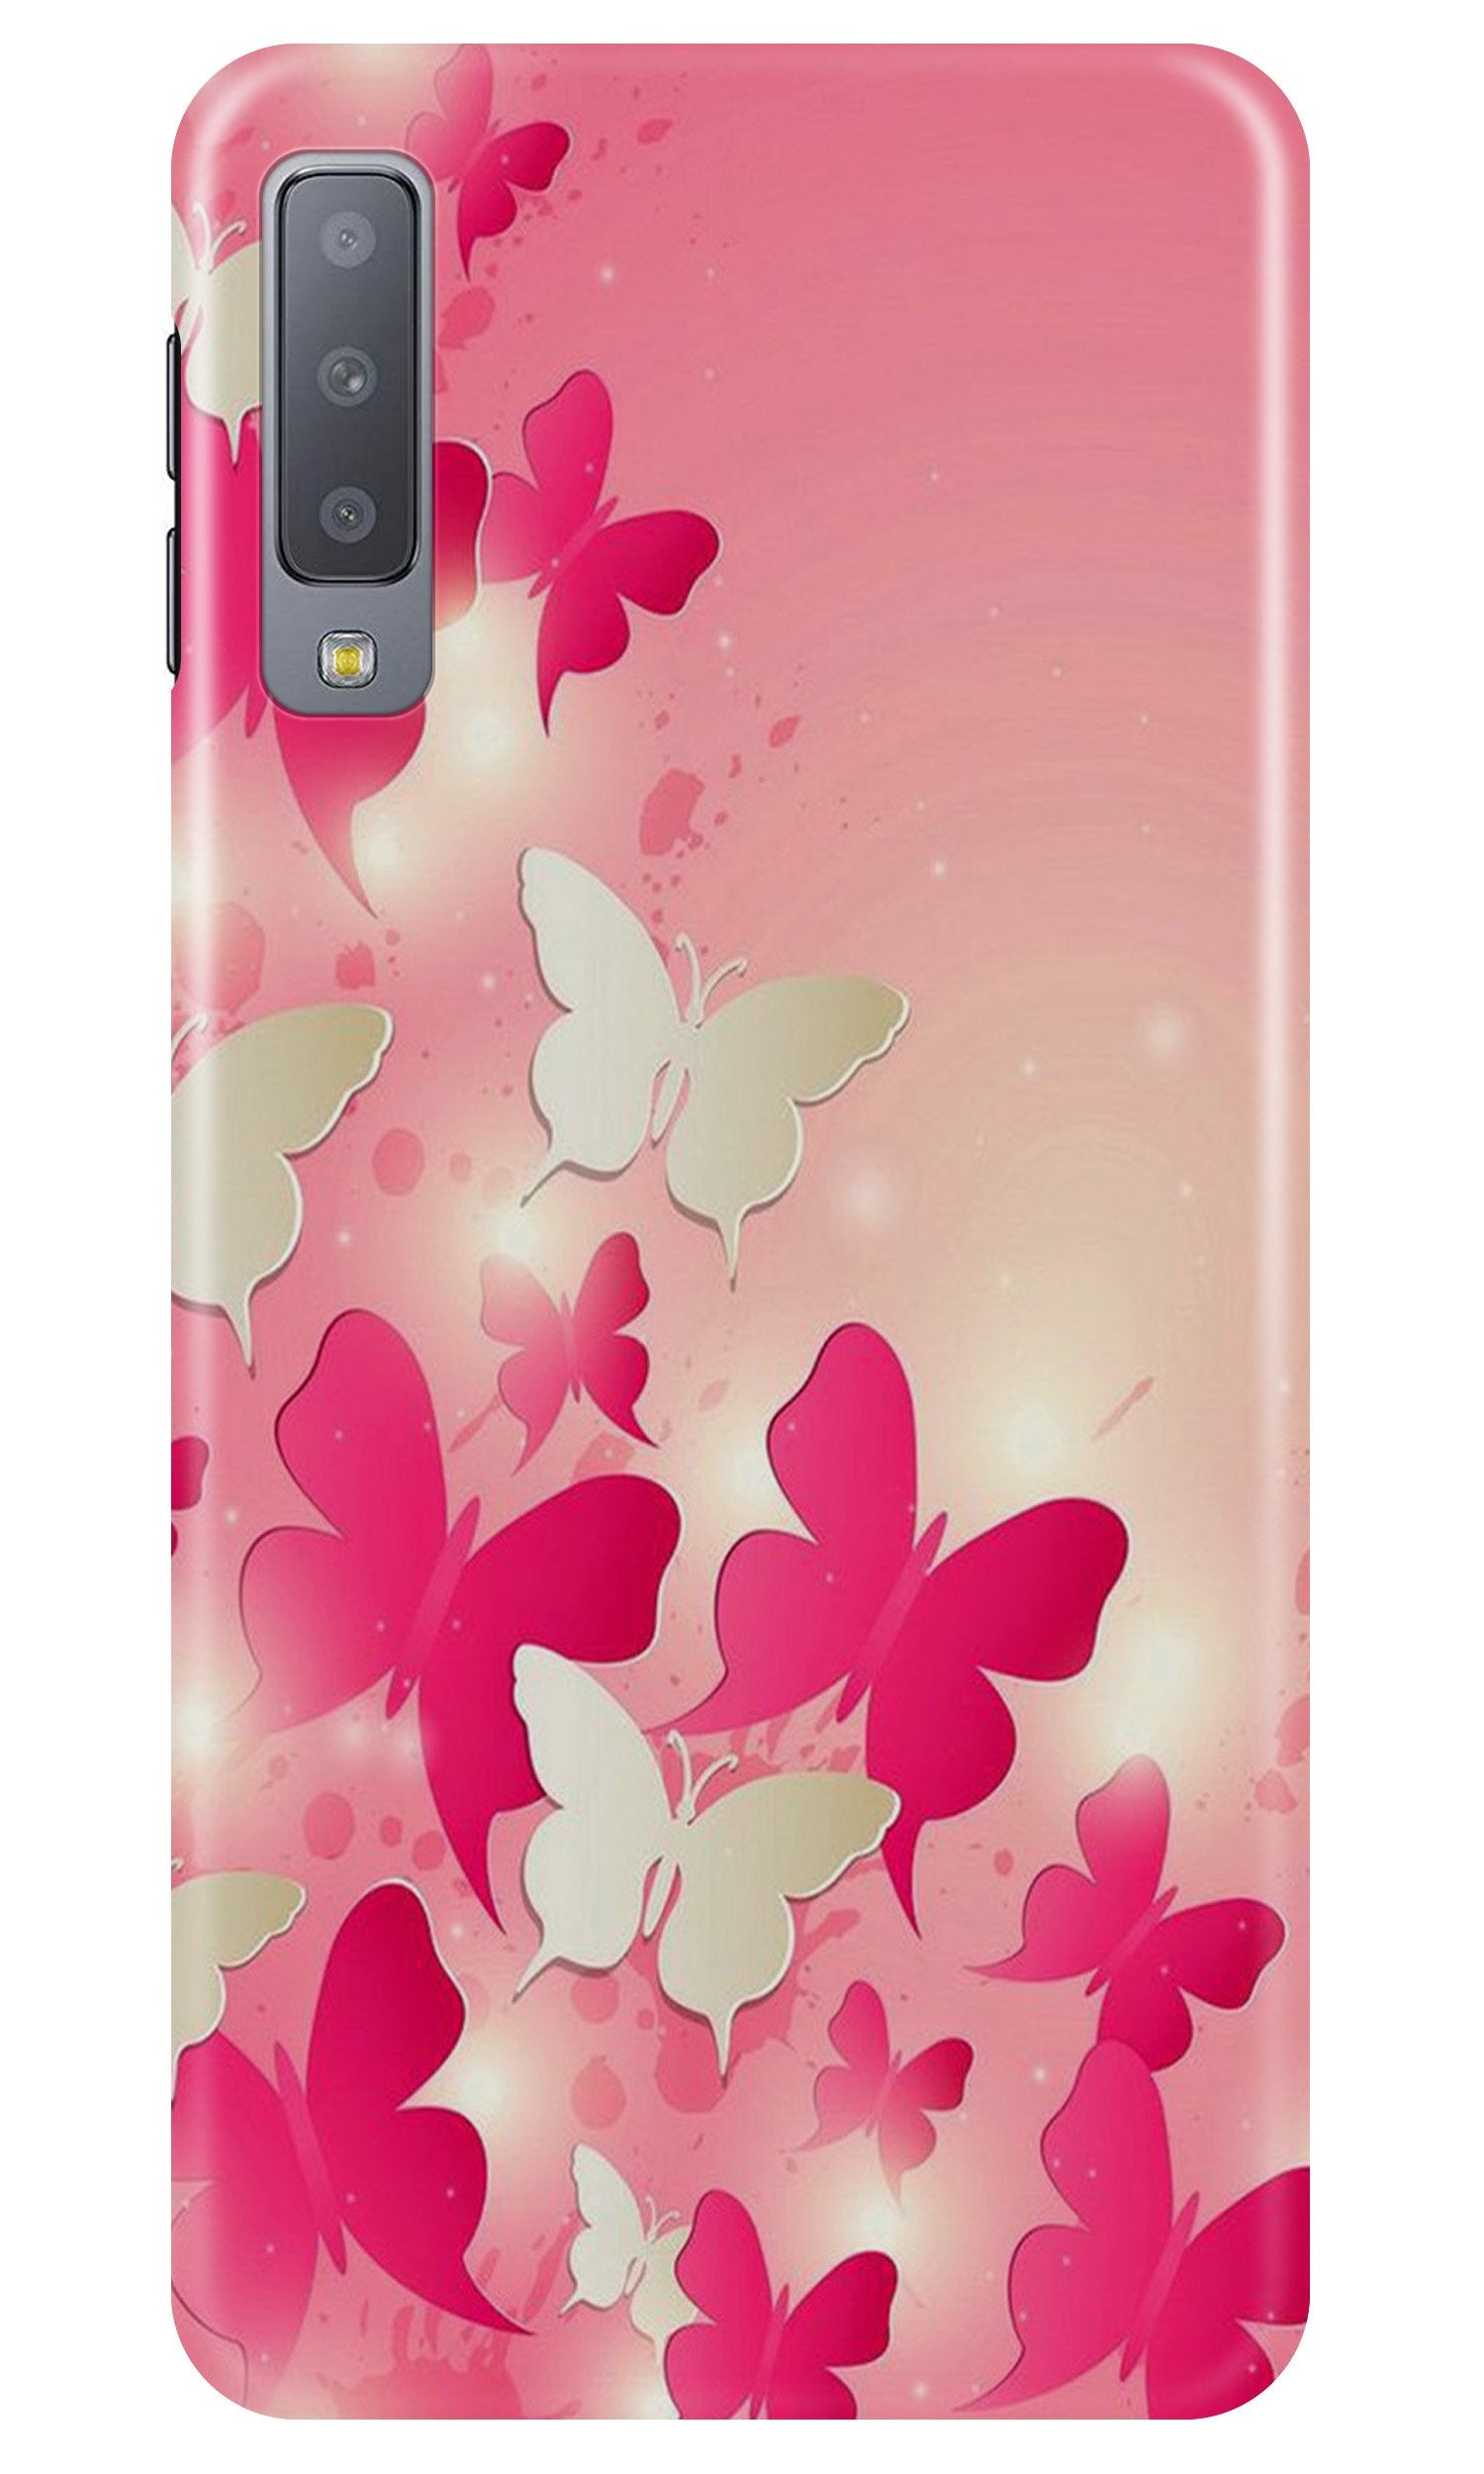 White Pick Butterflies Case for Galaxy A7 (2018)